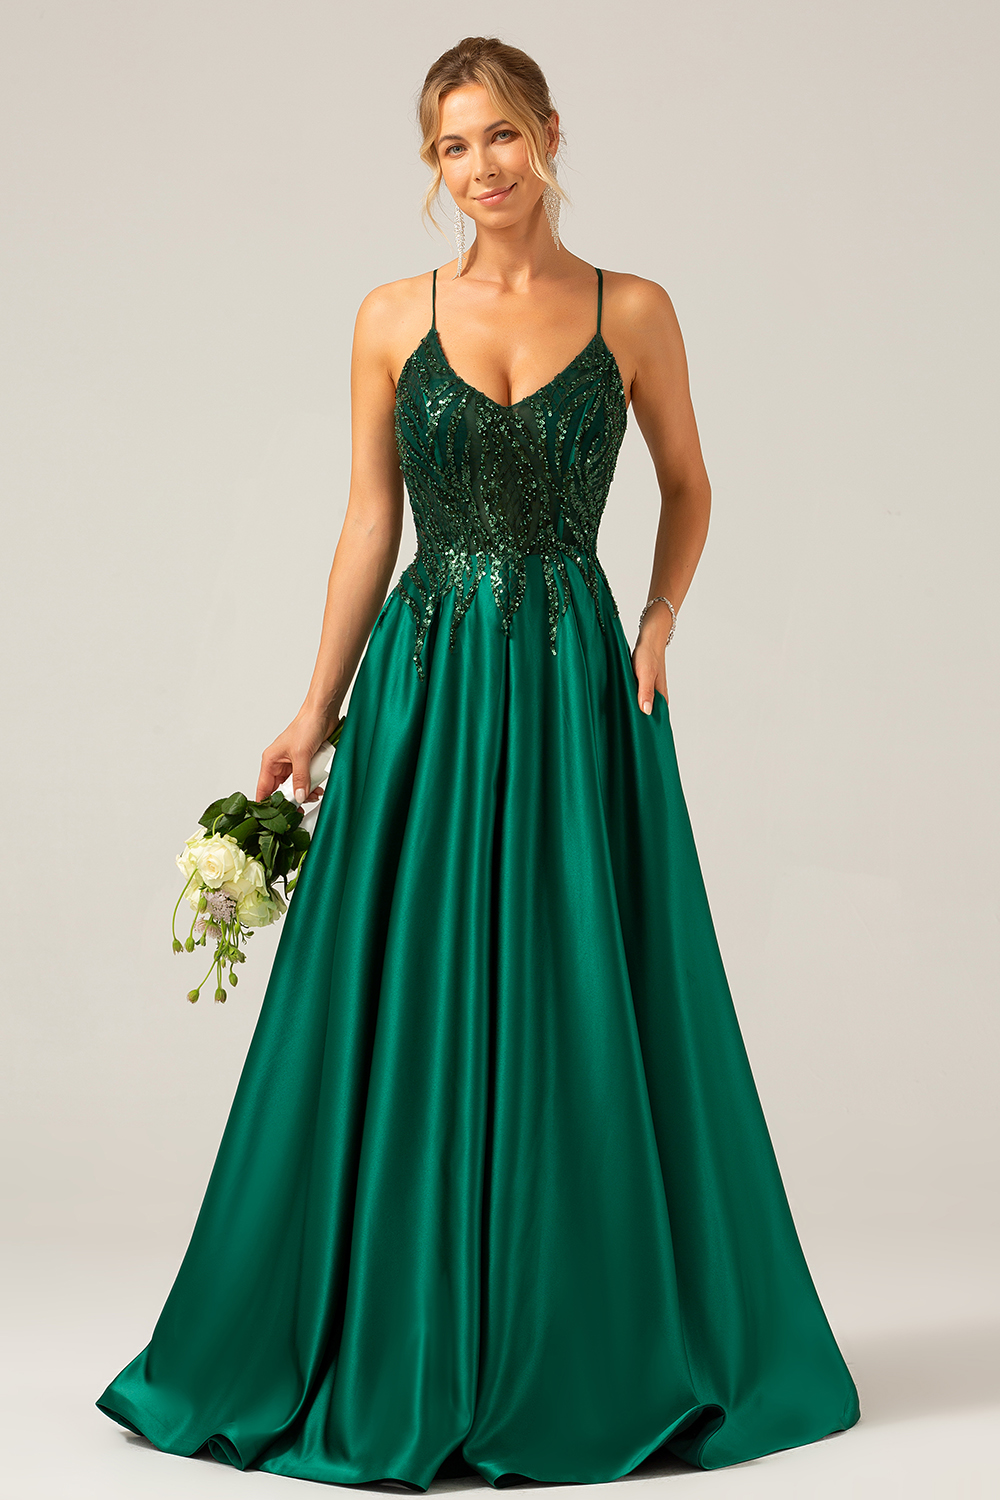 Leely Women Sequins Dark Green Long Prom Dress A-Line Spaghetti Straps Party Dress with Lace-up Back